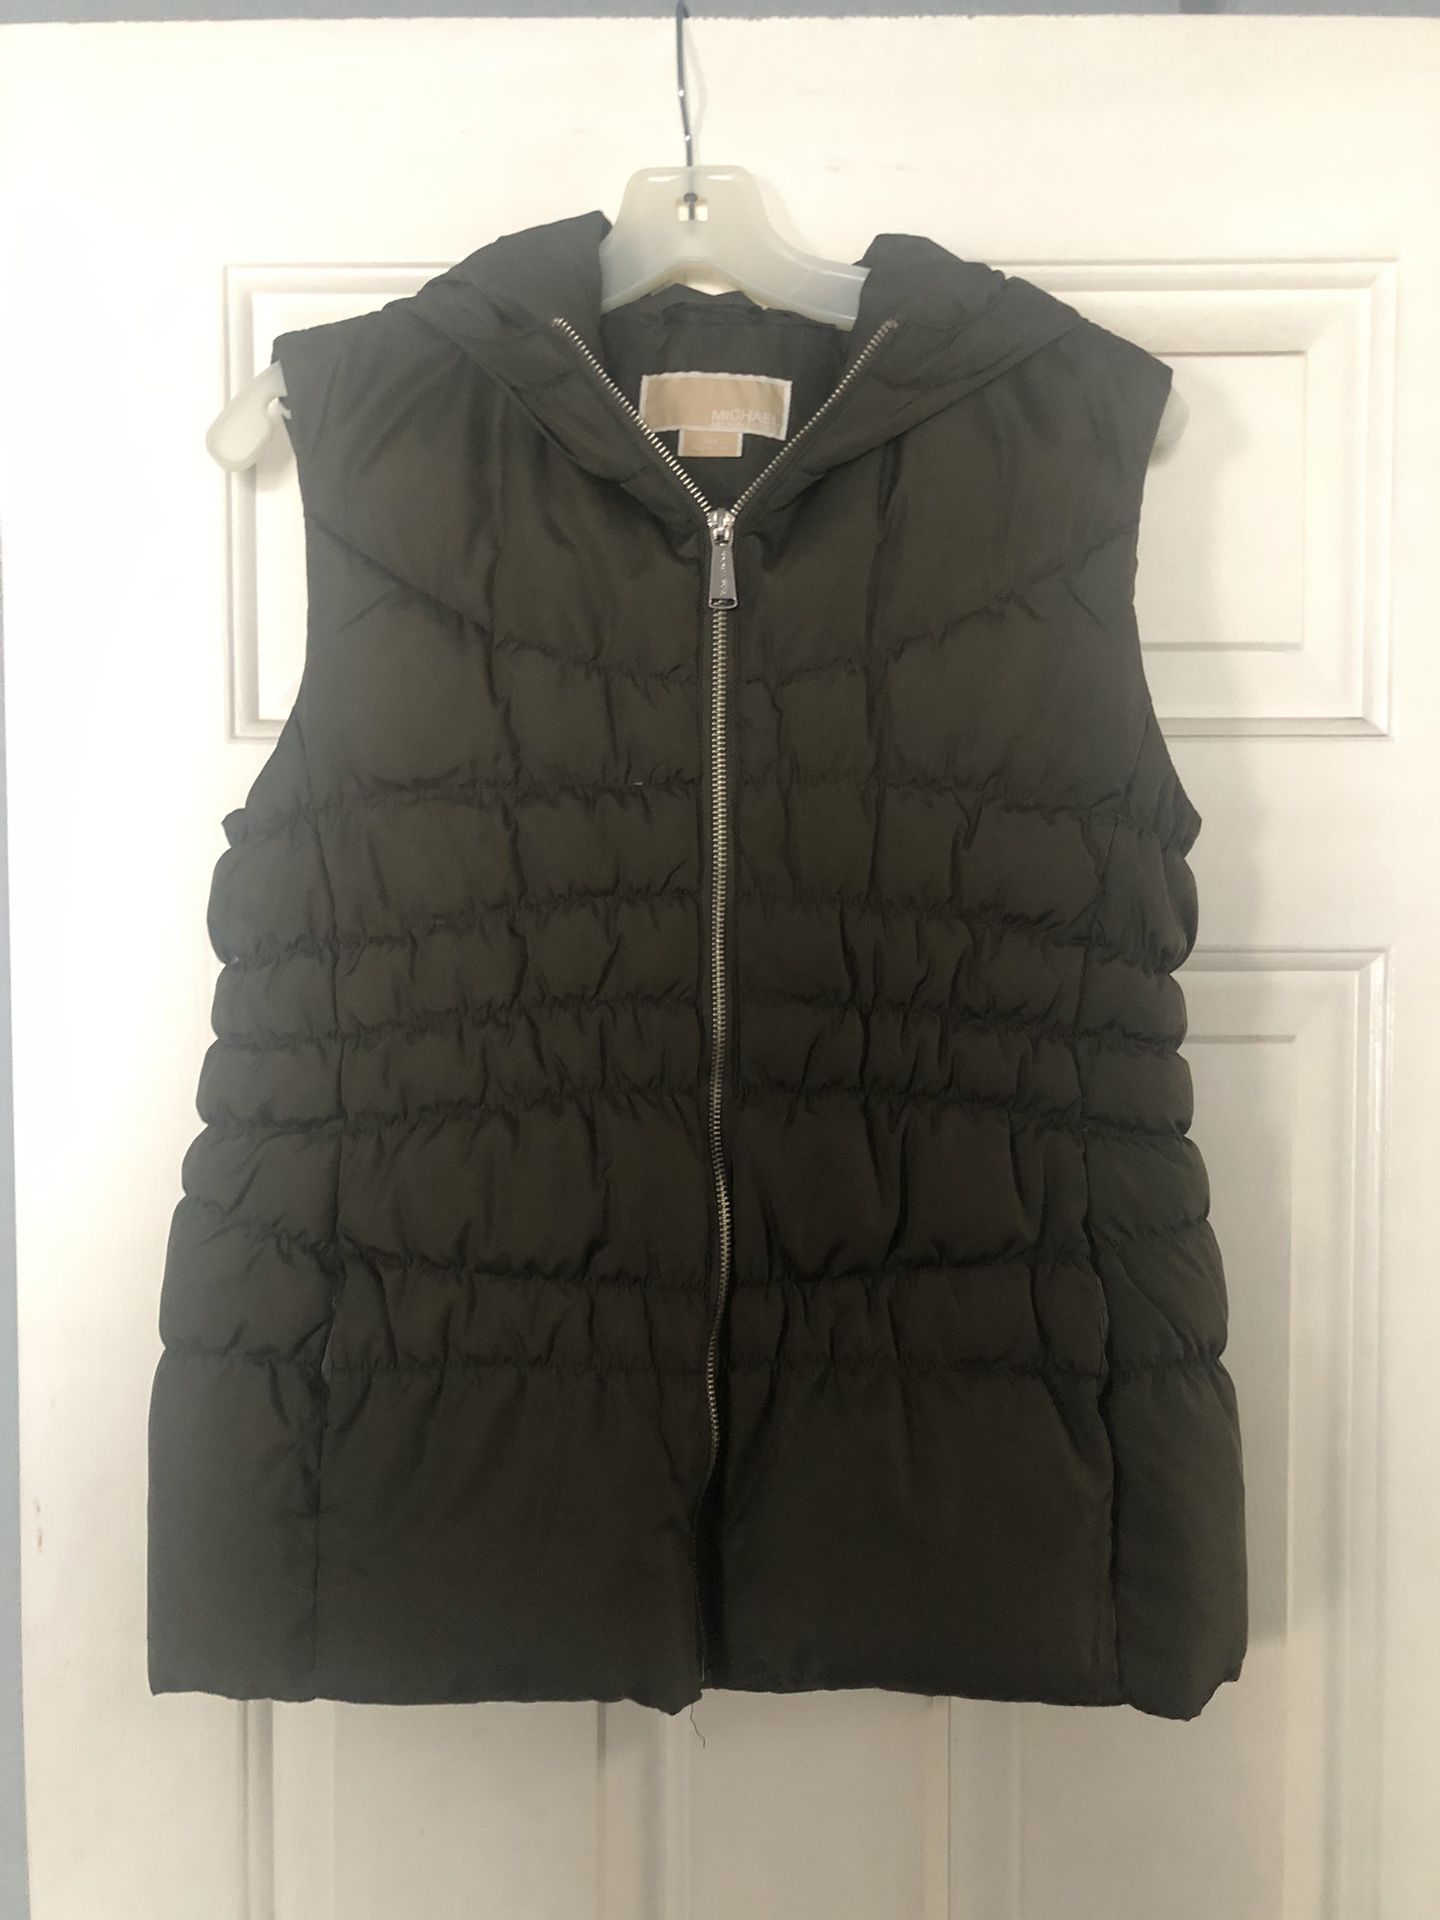 Olive Green Michael Kors Hooded Puffer Vest Medium for Sale in Chula Vista,  CA - OfferUp